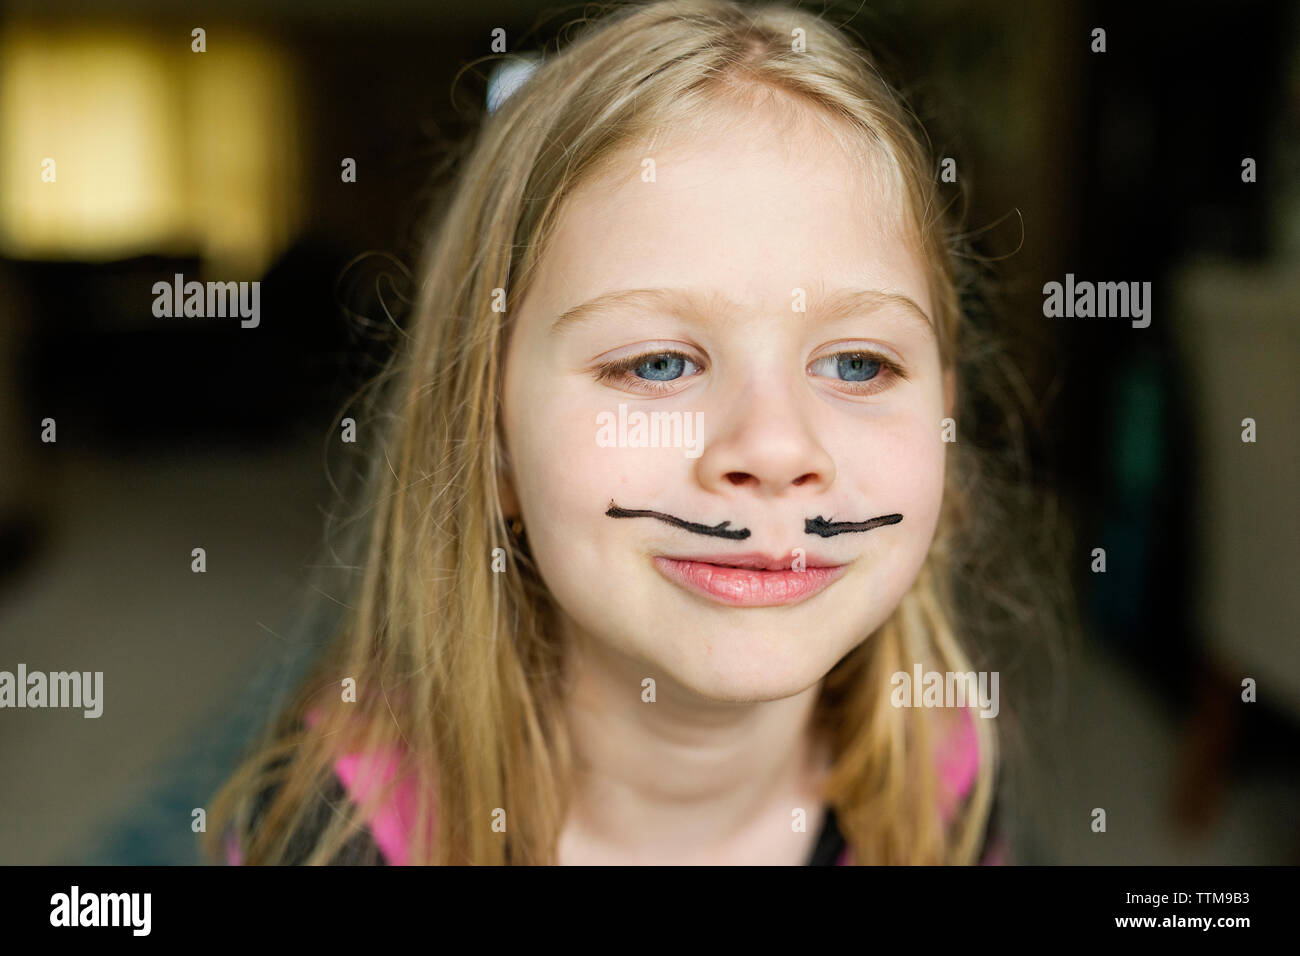 Girl with mustache face paint at home Stock Photo